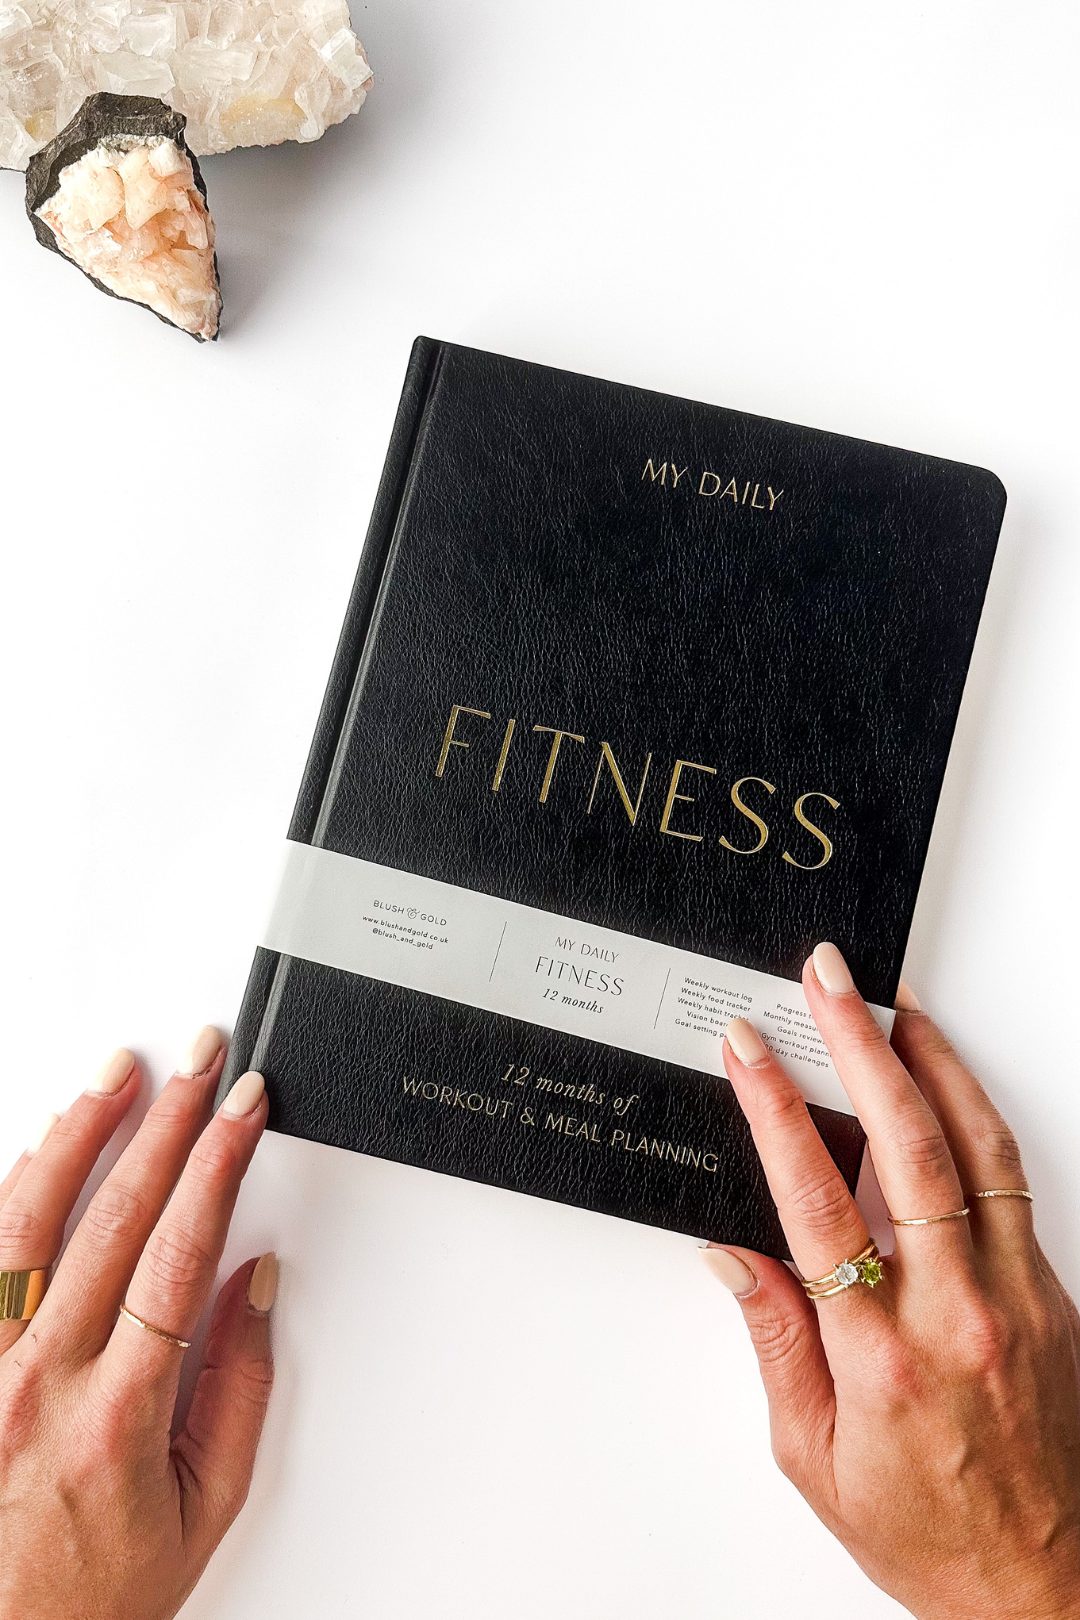 Stay on top of your fitness goals with this comprehensive planner. Track your workouts, plan your meals, and monitor your progress all in one convenient place. This Planner is from Blush and Gold and sold at Blackbird Designs.